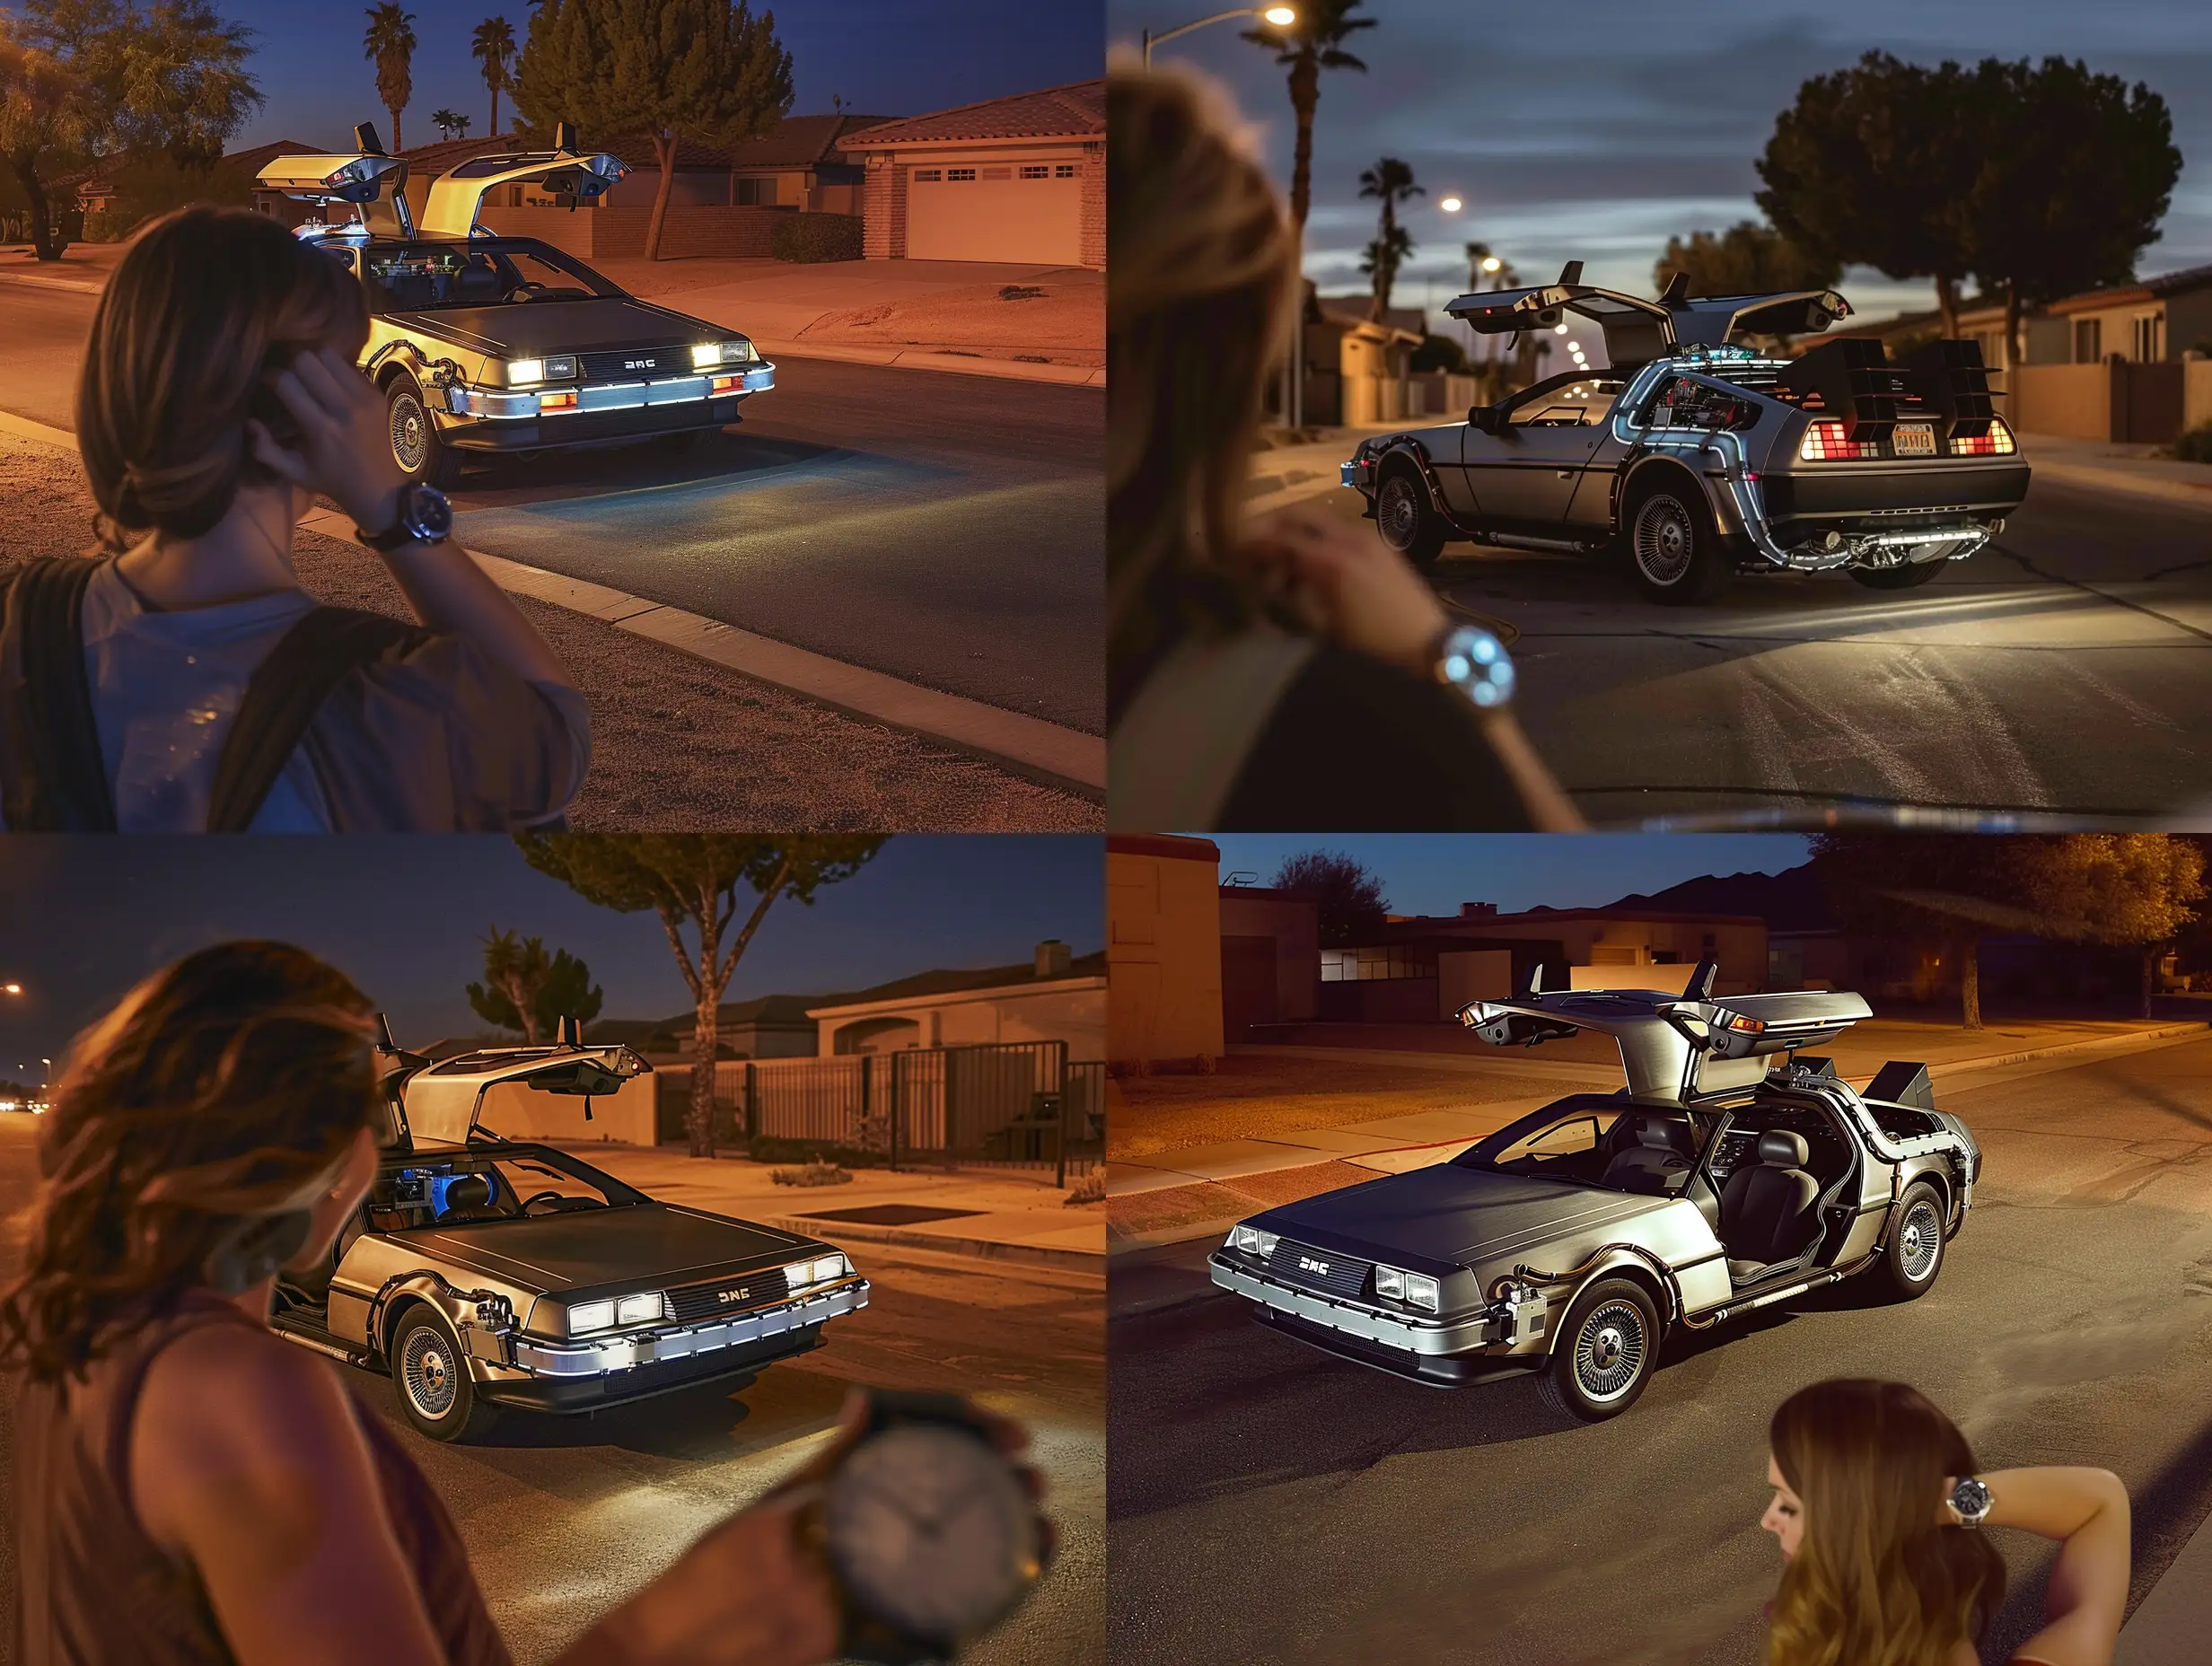 Deserted-Desert-Street-at-Night-with-Back-to-the-Future-Delorean-and-Woman-Checking-Watch